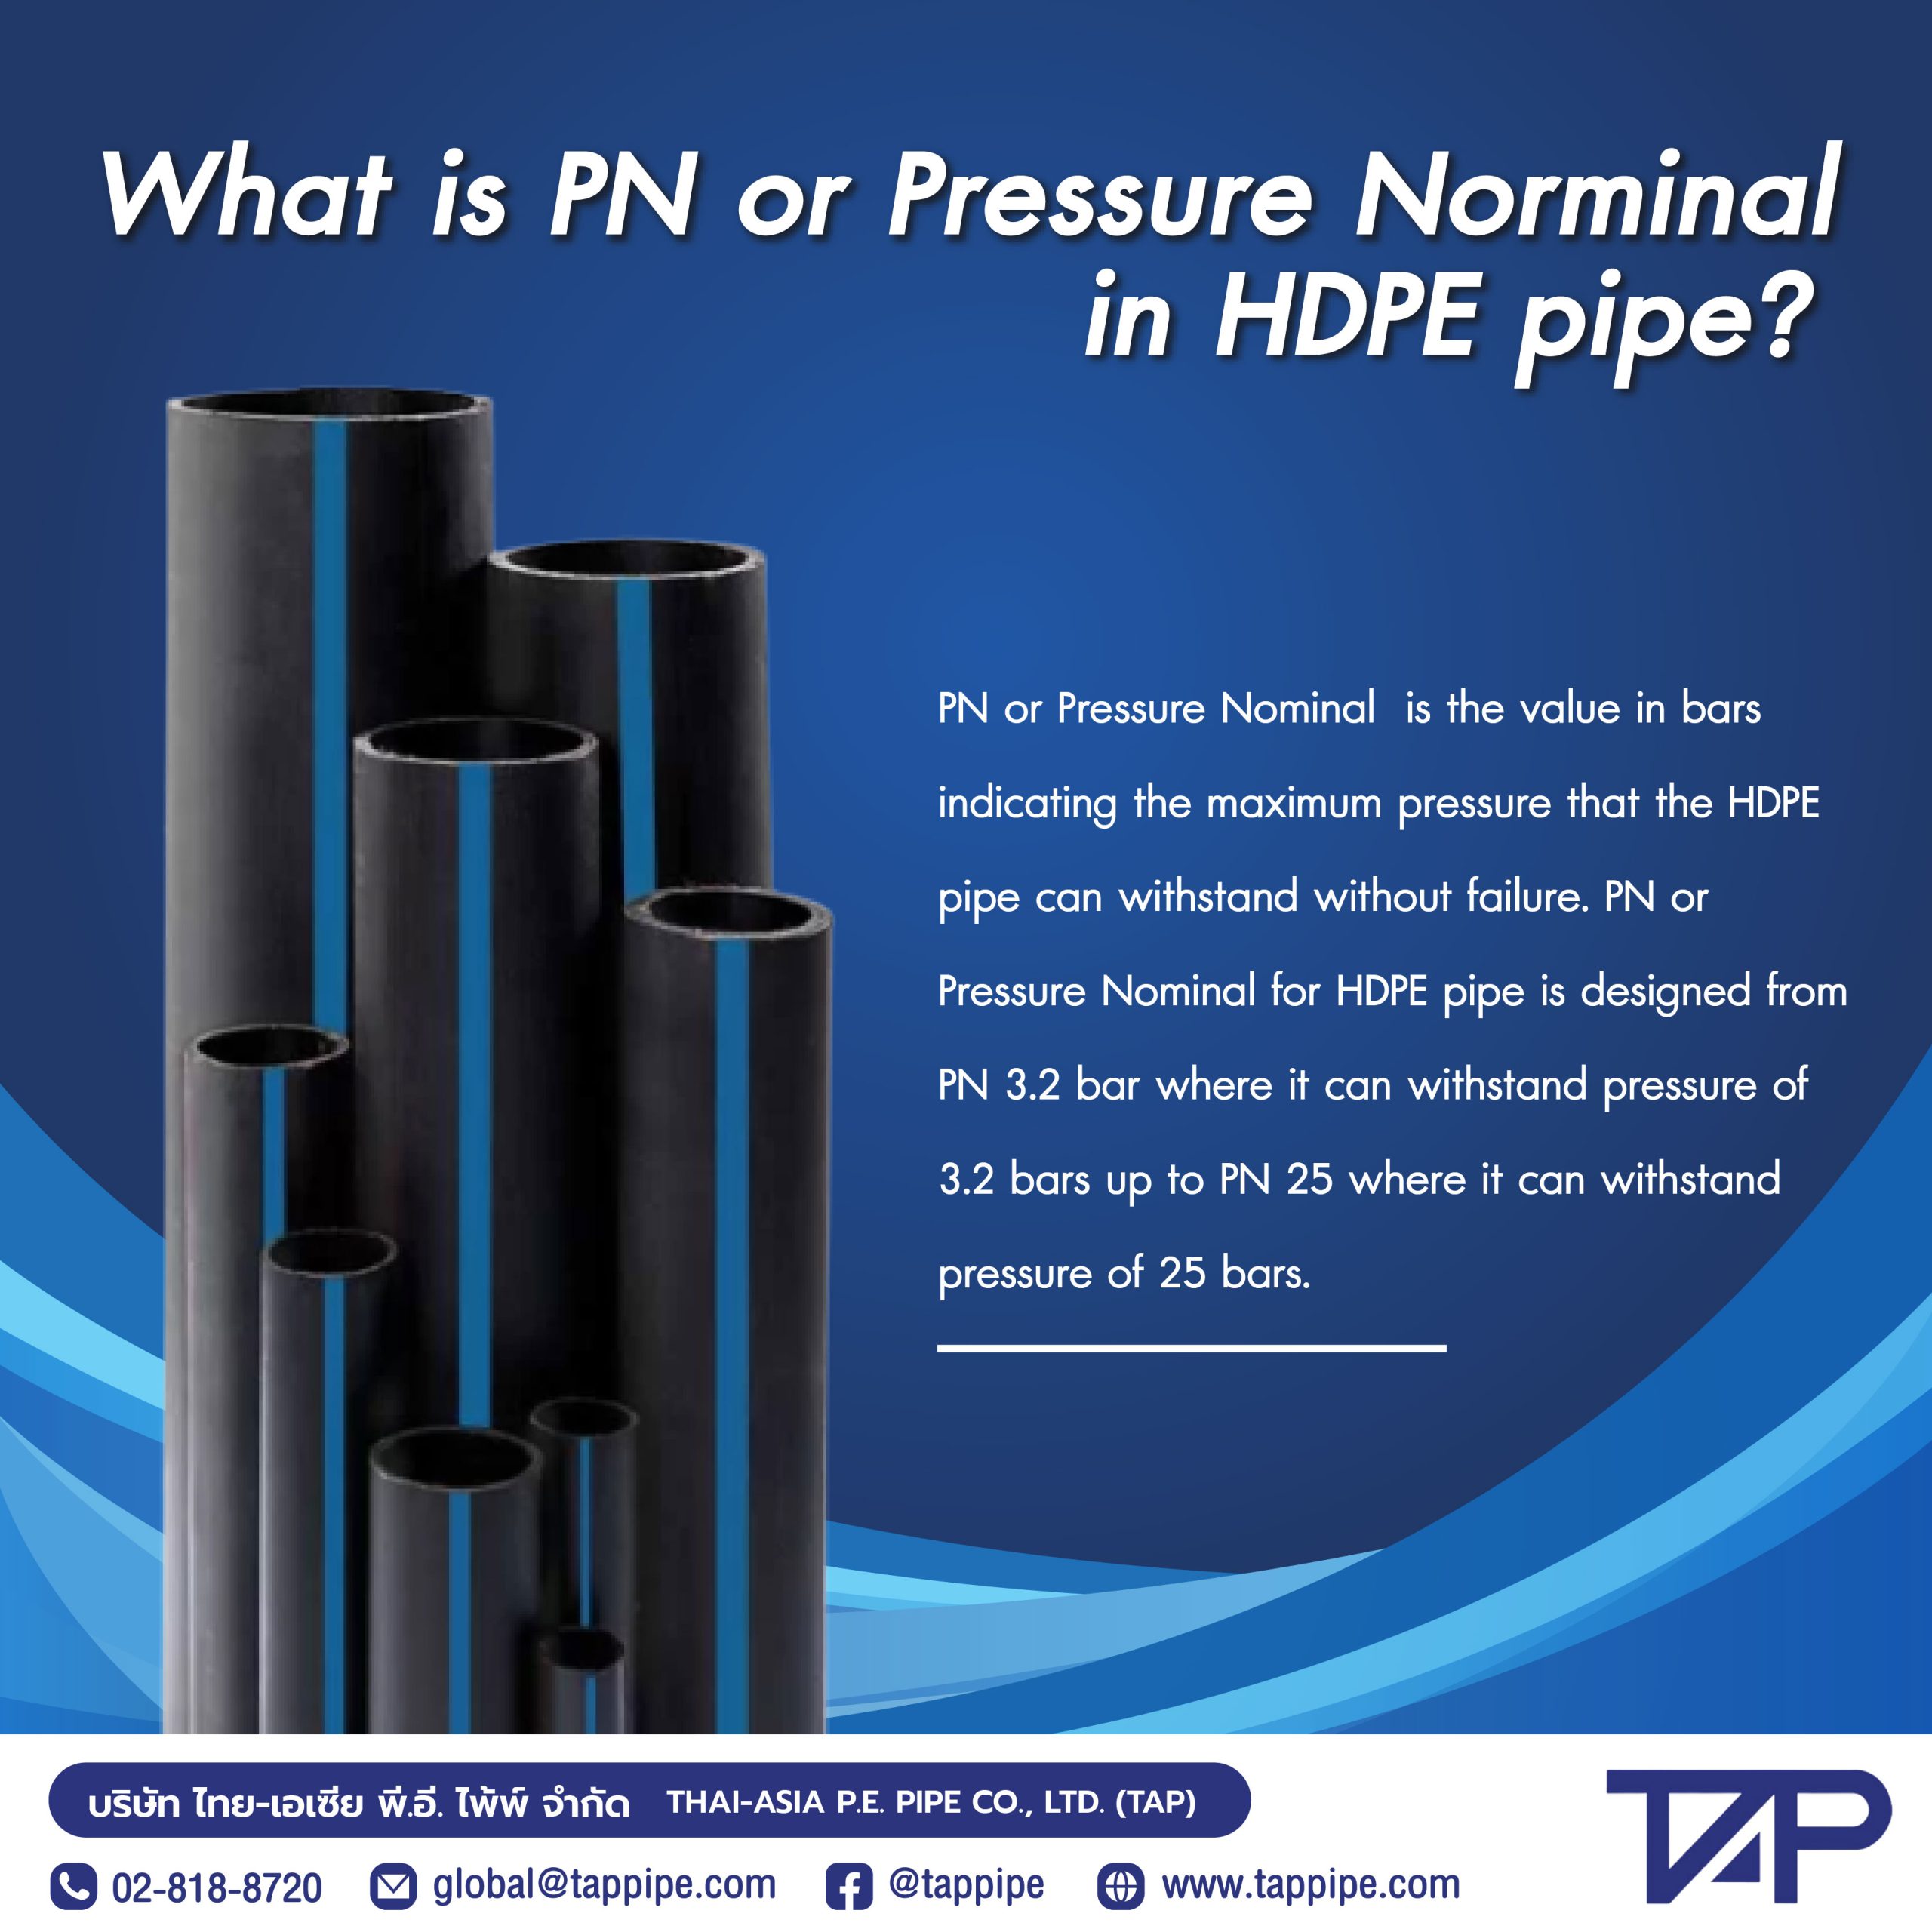 What is PN or Pressure Norminal in HDPE pipe?